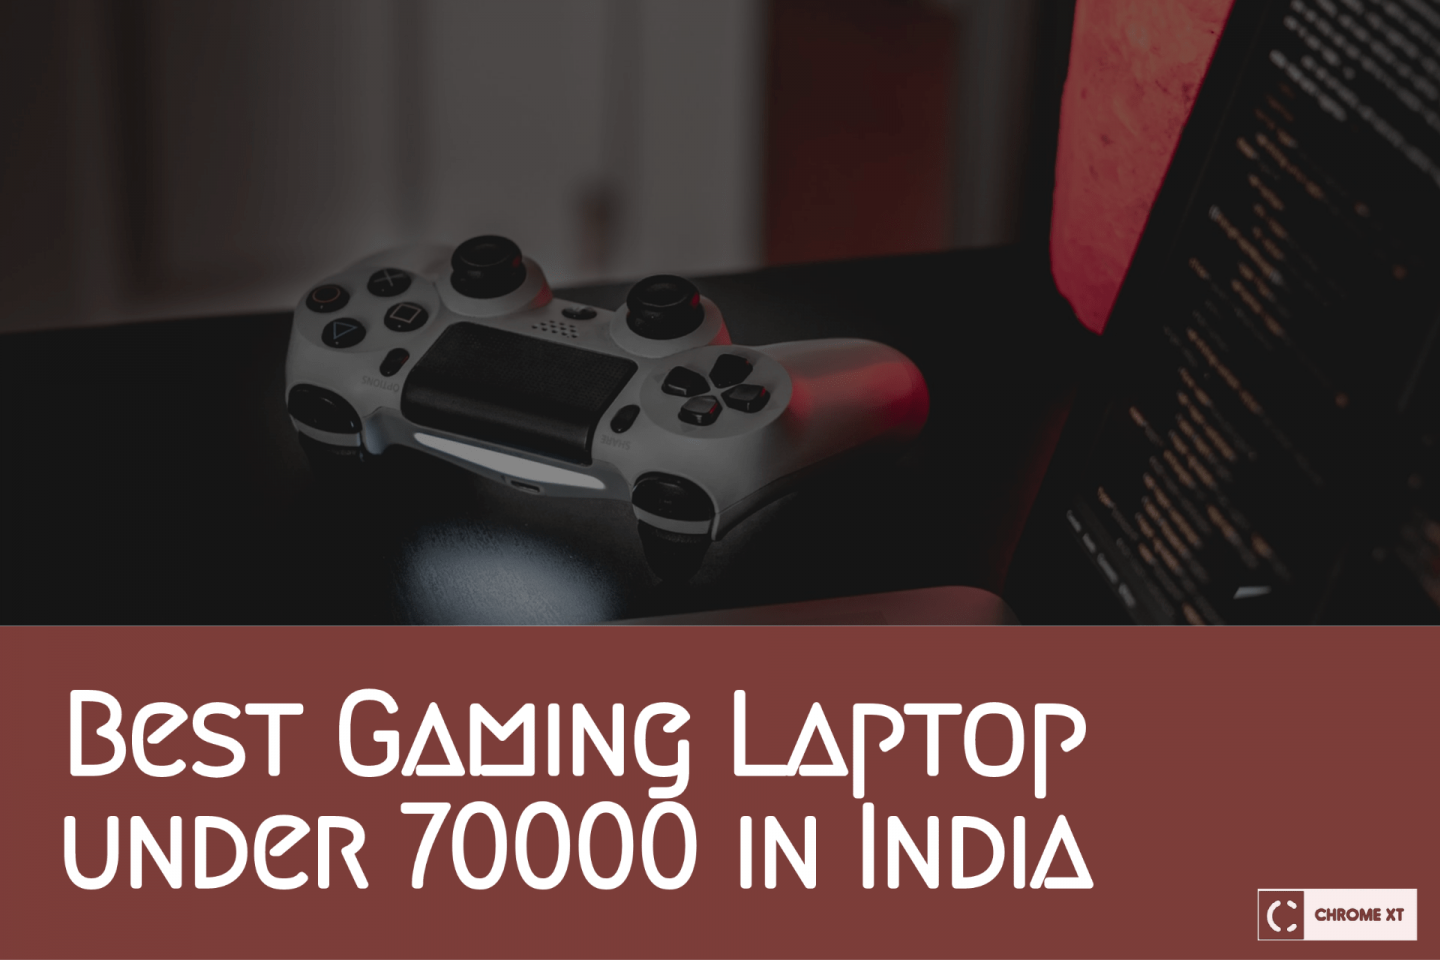 Budget Laptop Buying Guide in India